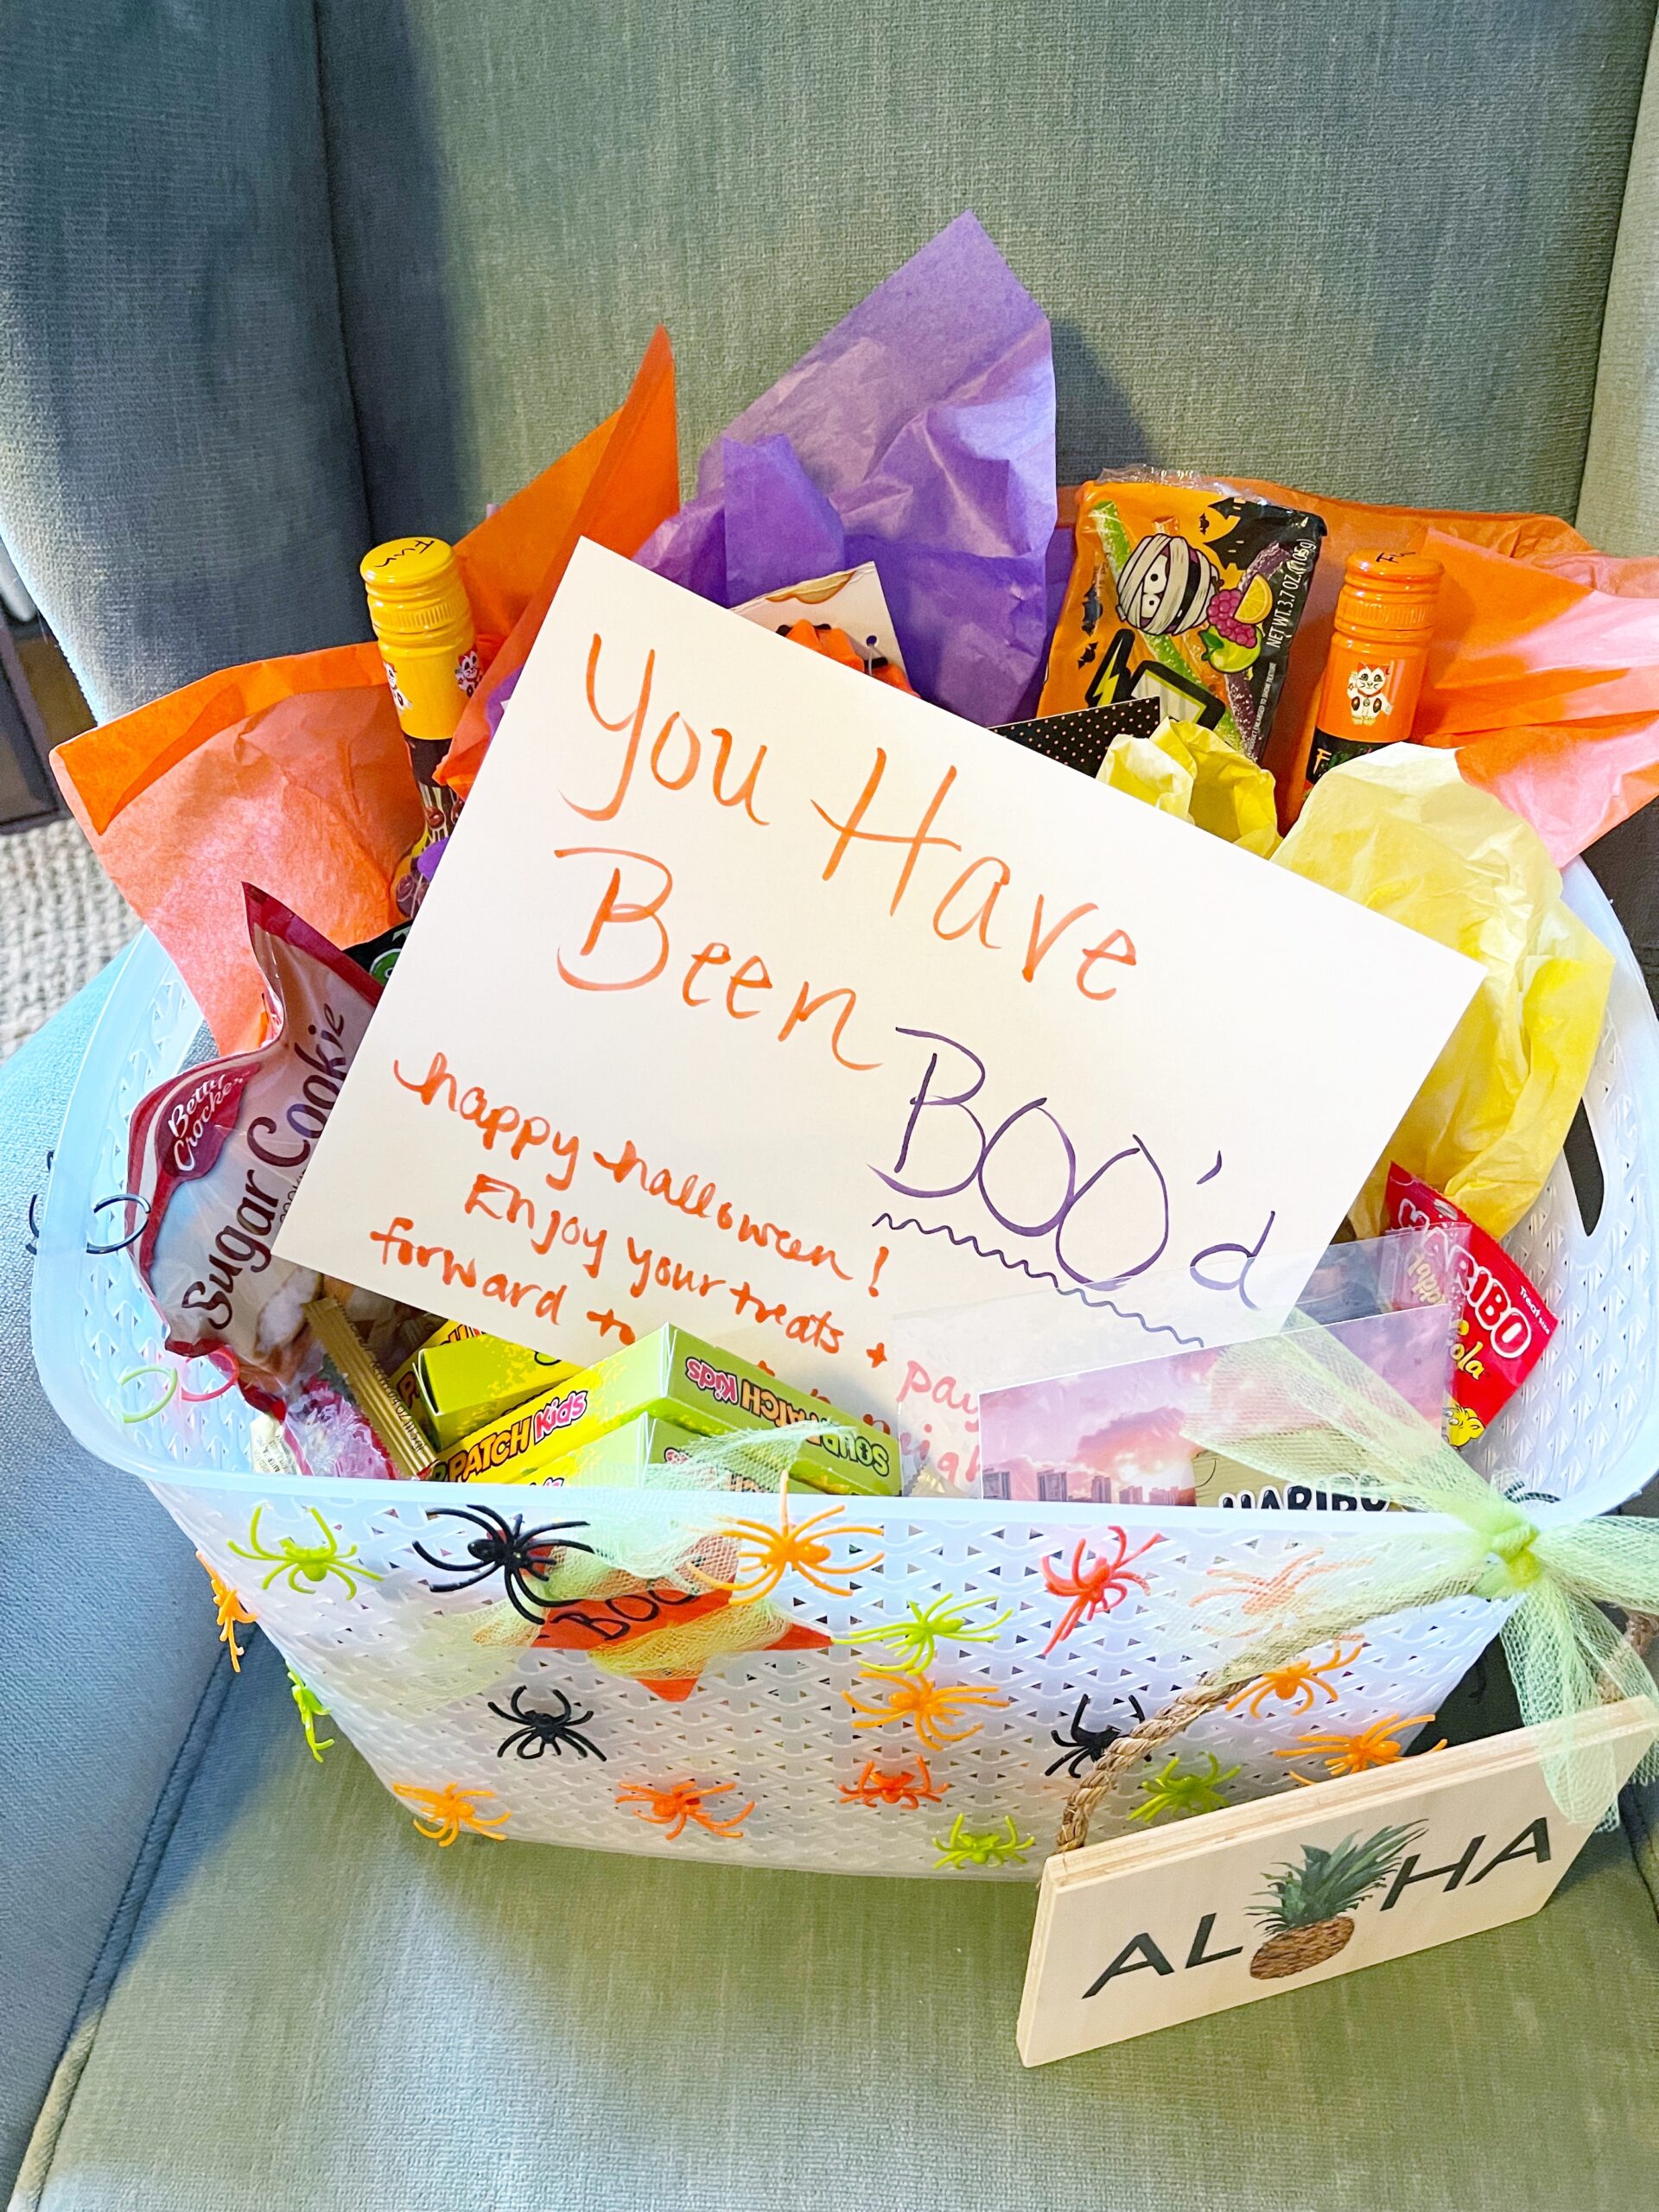 How To Boo Your Neighbor For Halloween - Have you been wanting to BOO your neighbor? I'm sharing more about this fun Halloween idea and what you need to get started! | Halloween ideas | Halloween BOO basket